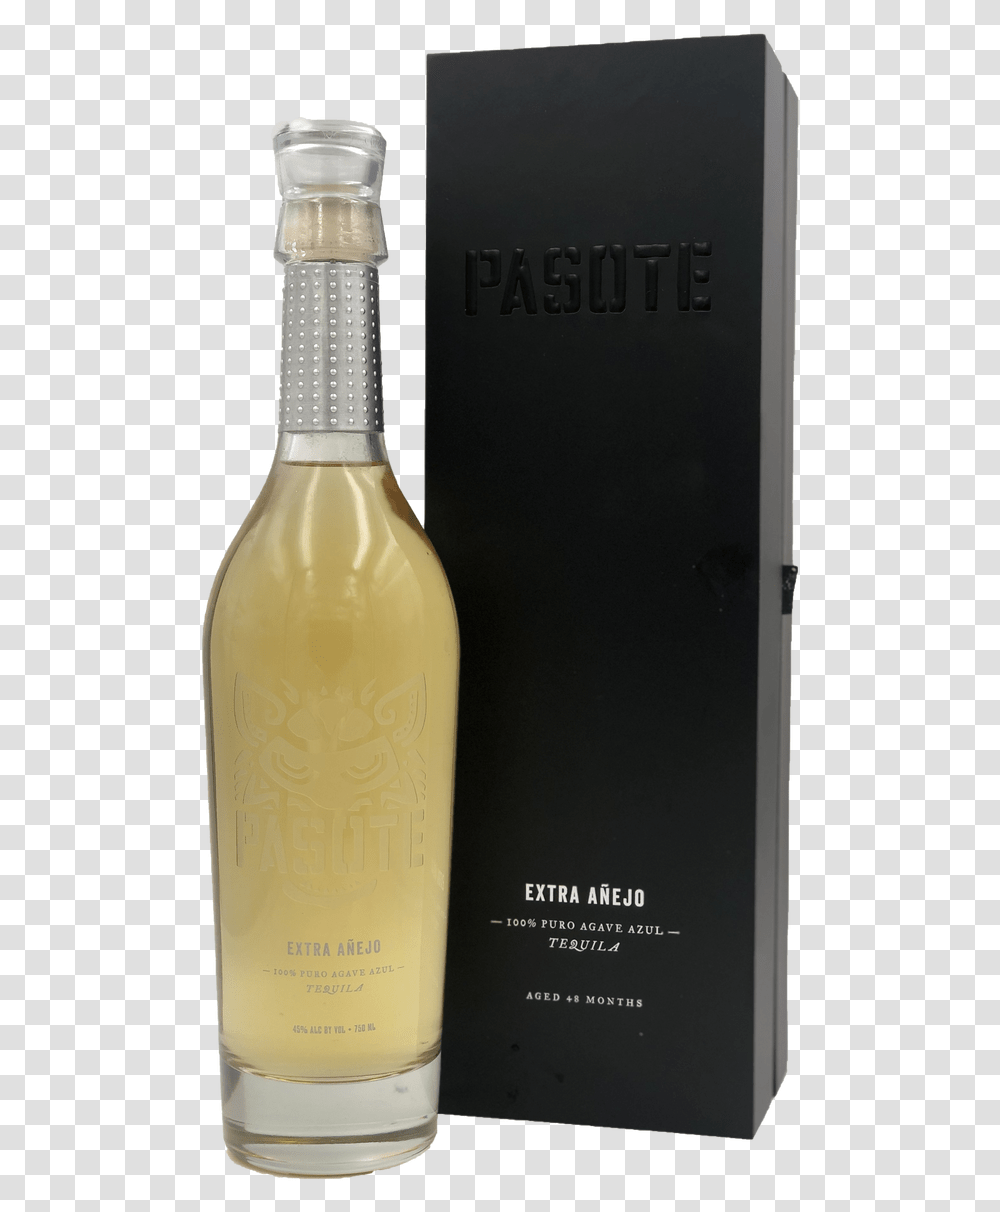 Pasote Limited Release Extra Anejo Tequila Glass Bottle, Liquor, Alcohol, Beverage, Drink Transparent Png